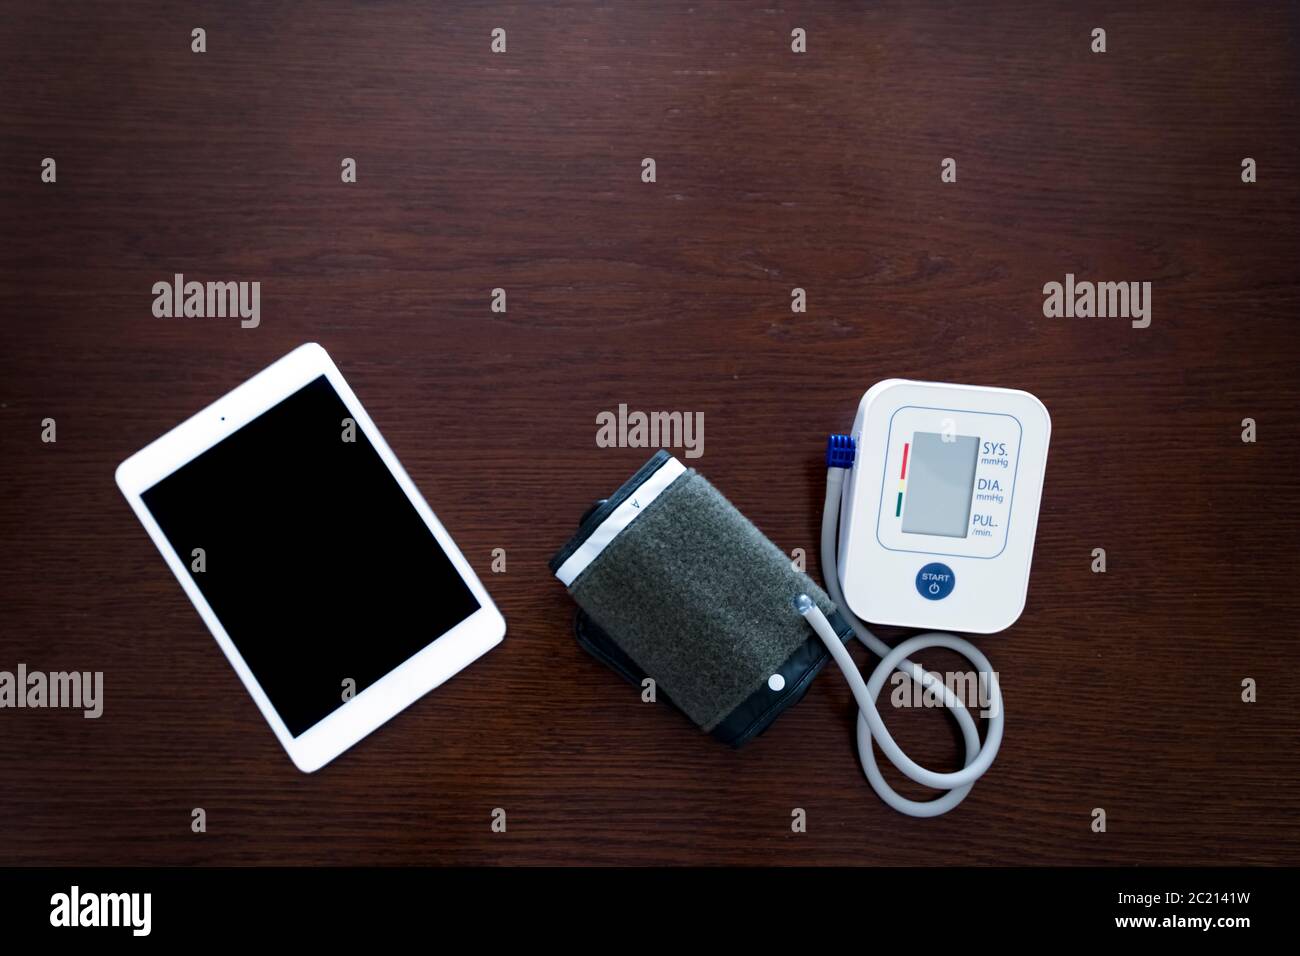 Digital blood pressure monitor with tablet on wooden table Stock Photo